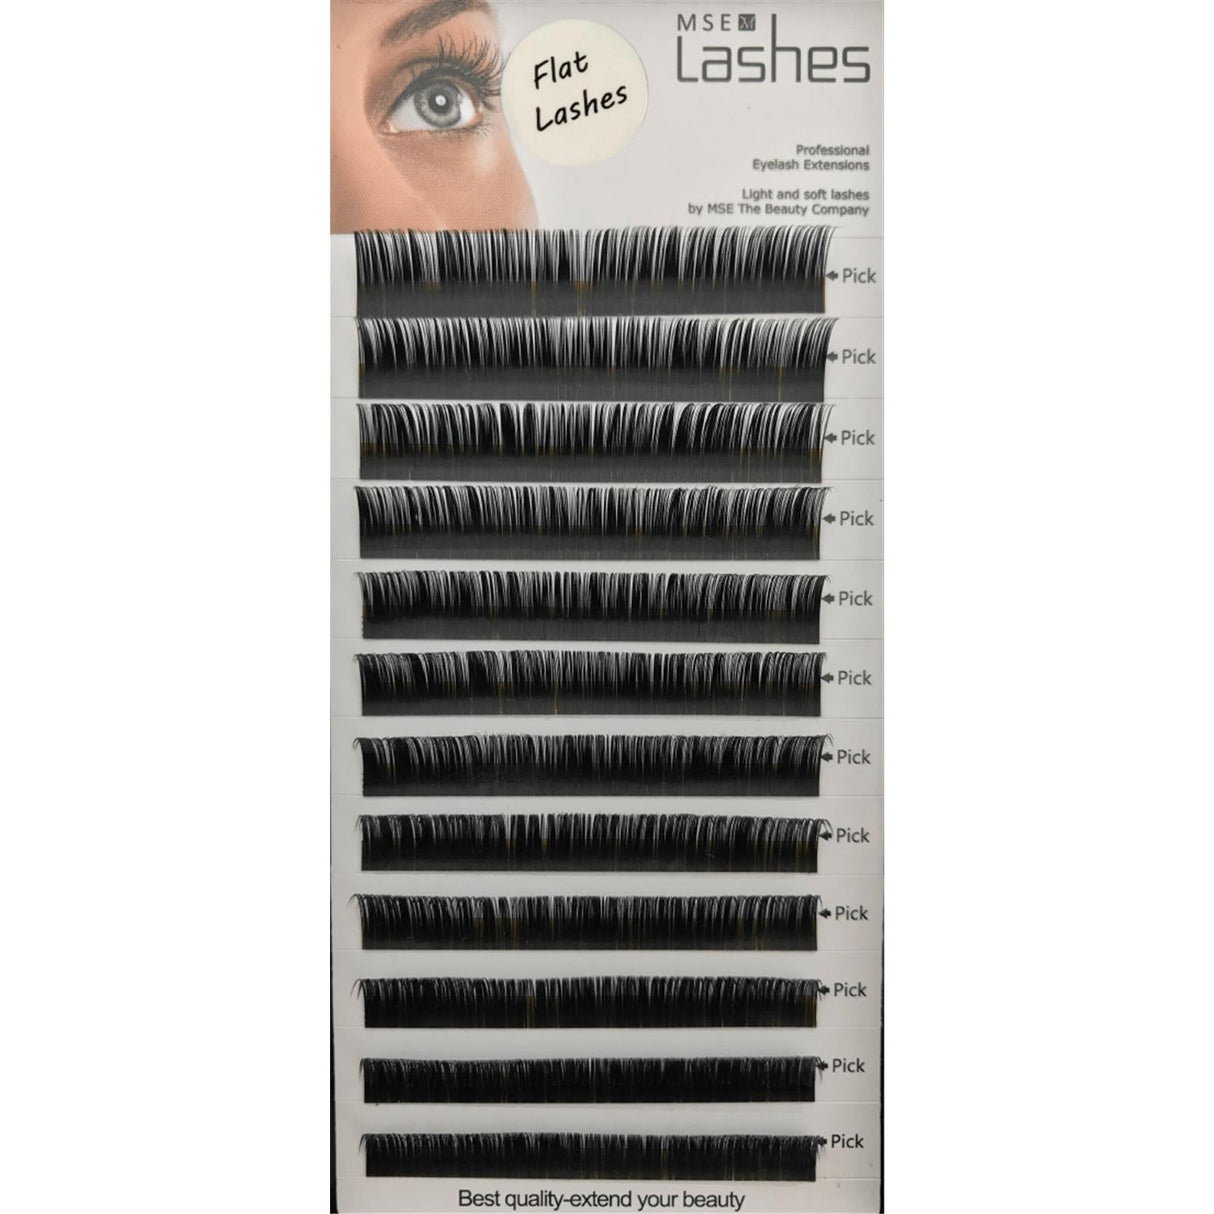 Seidenwimpern Flat Lashes Trays - D-Curl - 0,15 mm - 8 mm - MSE - The Beauty Company